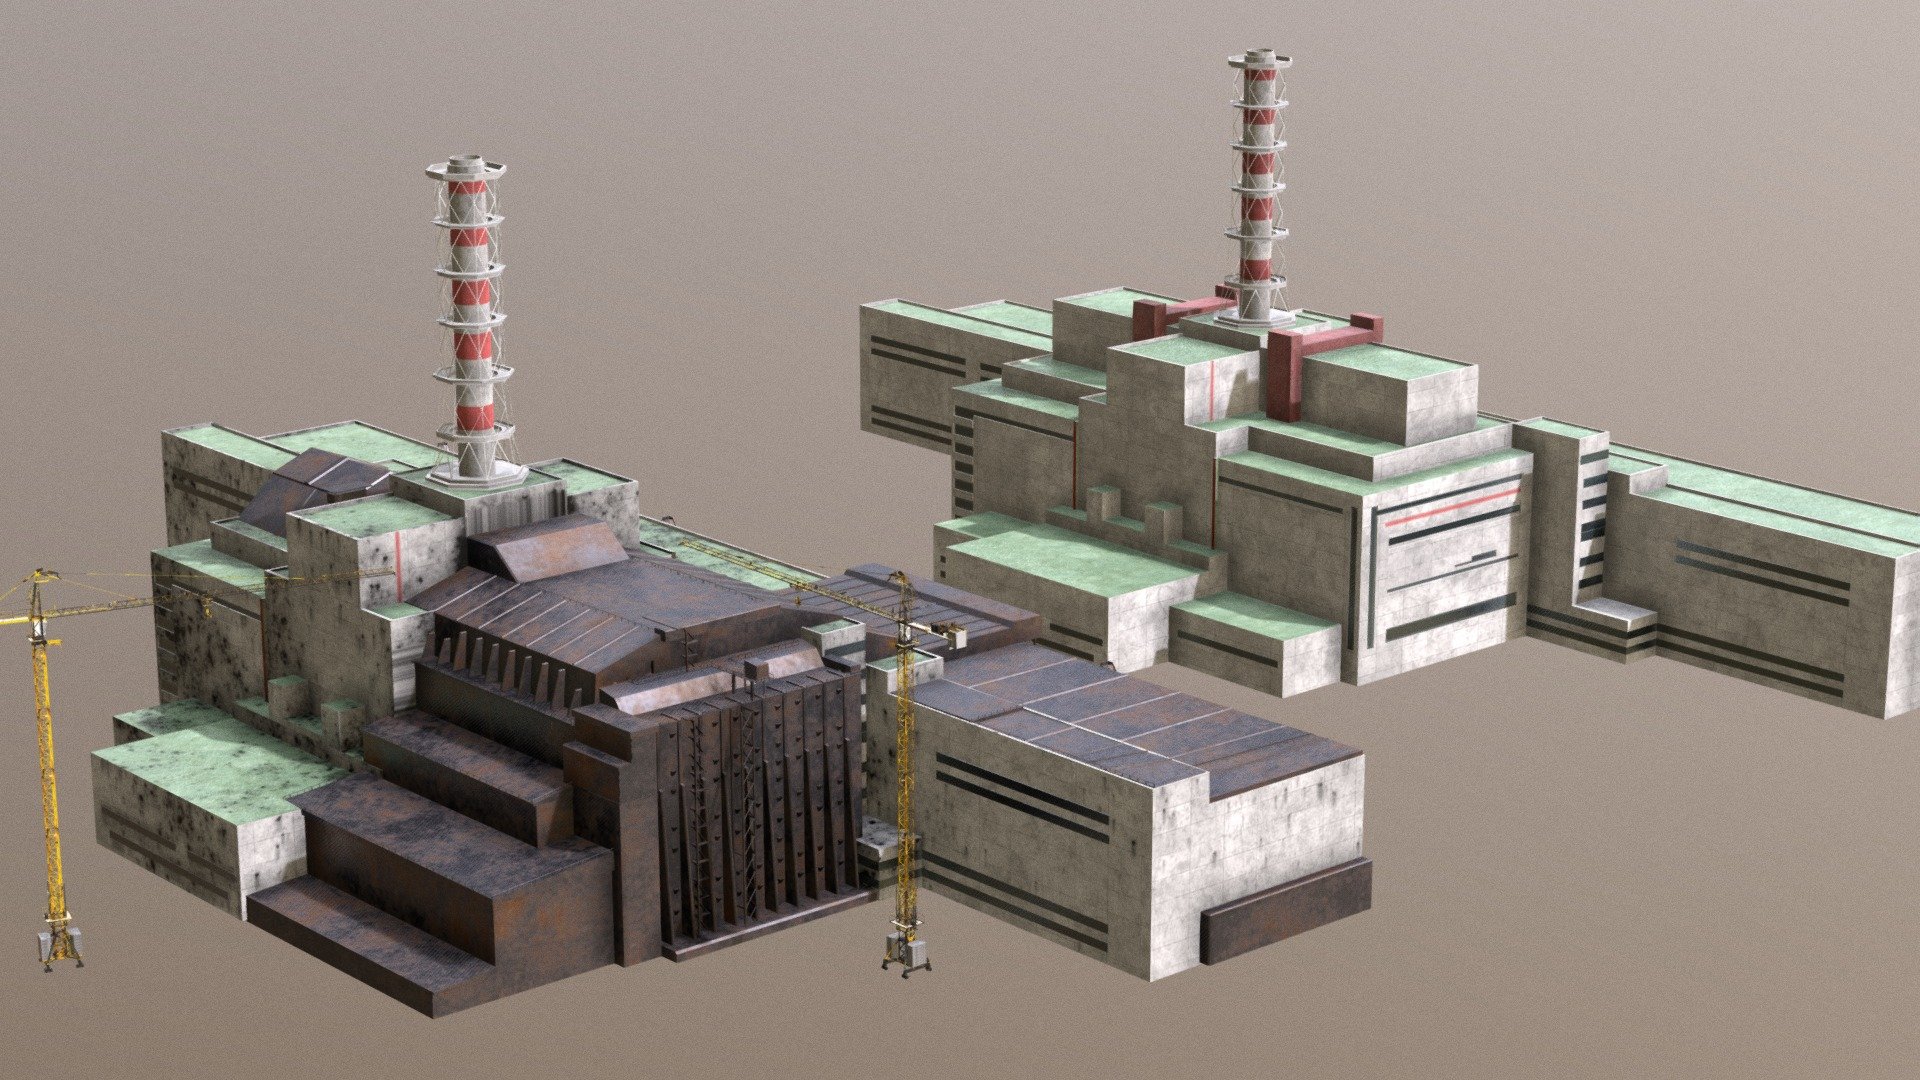 Chernobyl plant -  3. and 4. sarkofag + before 
Game ready model for unreal, unity engine. For scenes, videos, games.
4k PBR  textures in substance painter. Albedo, Metalic + rougness, Normal map. 
gizmos ready. You need somting ? PM me =)
ready for 3D printing - Chernobyl plant -  3. and 4. sarkofag + before - Buy Royalty Free 3D model by Thomas Binder (@bindertom61) 3d model